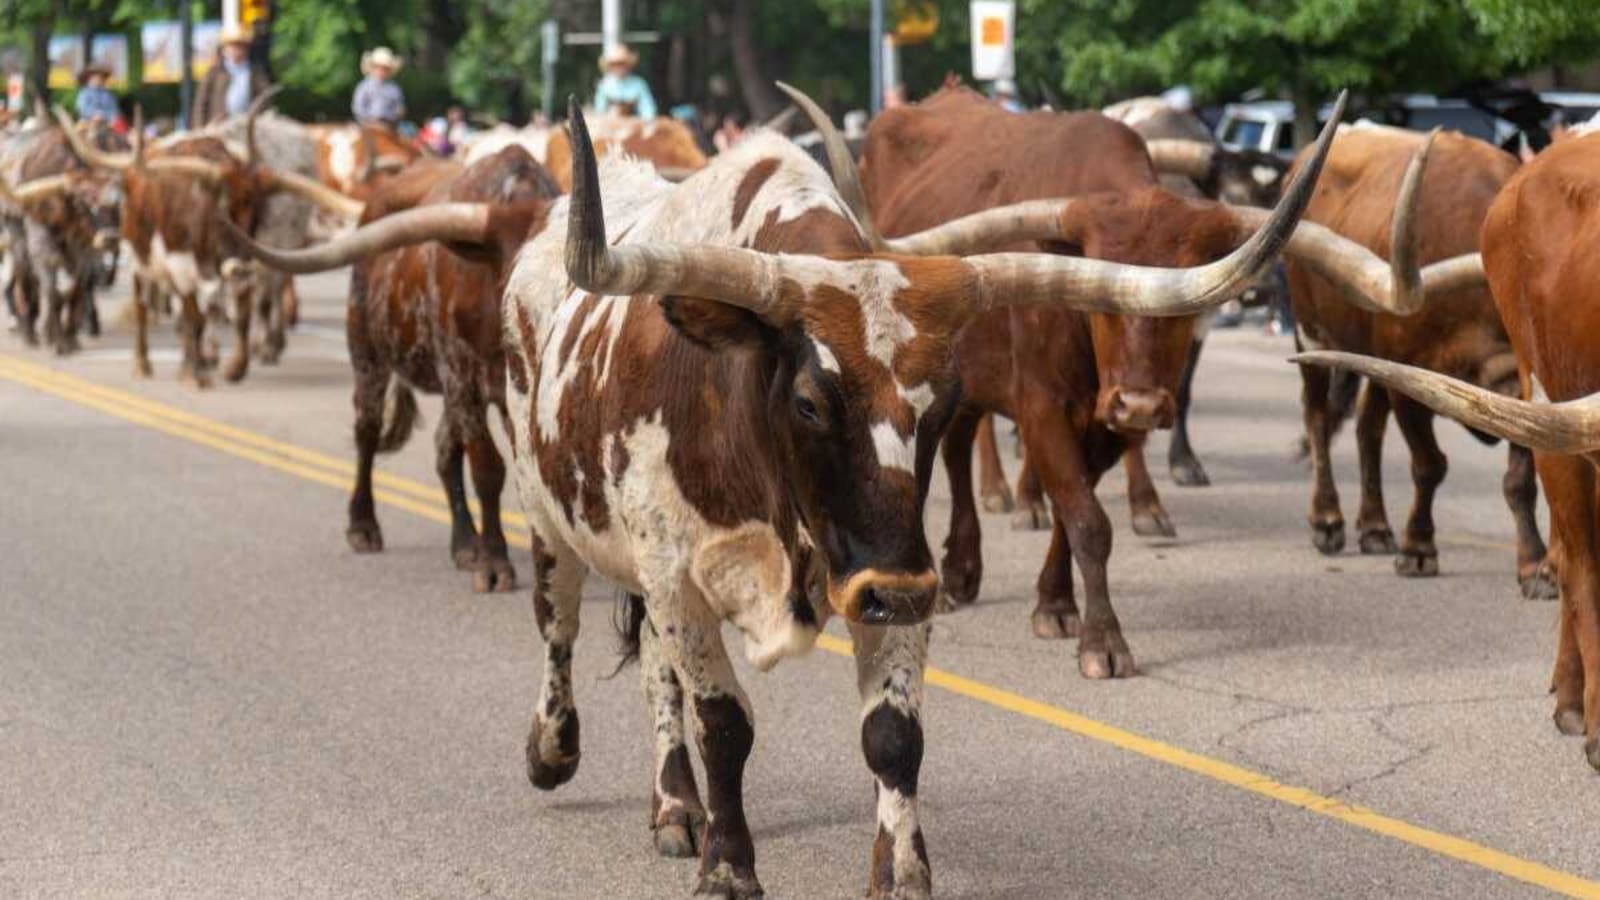 Your Guide to Cattle Drive Adventure Vacations